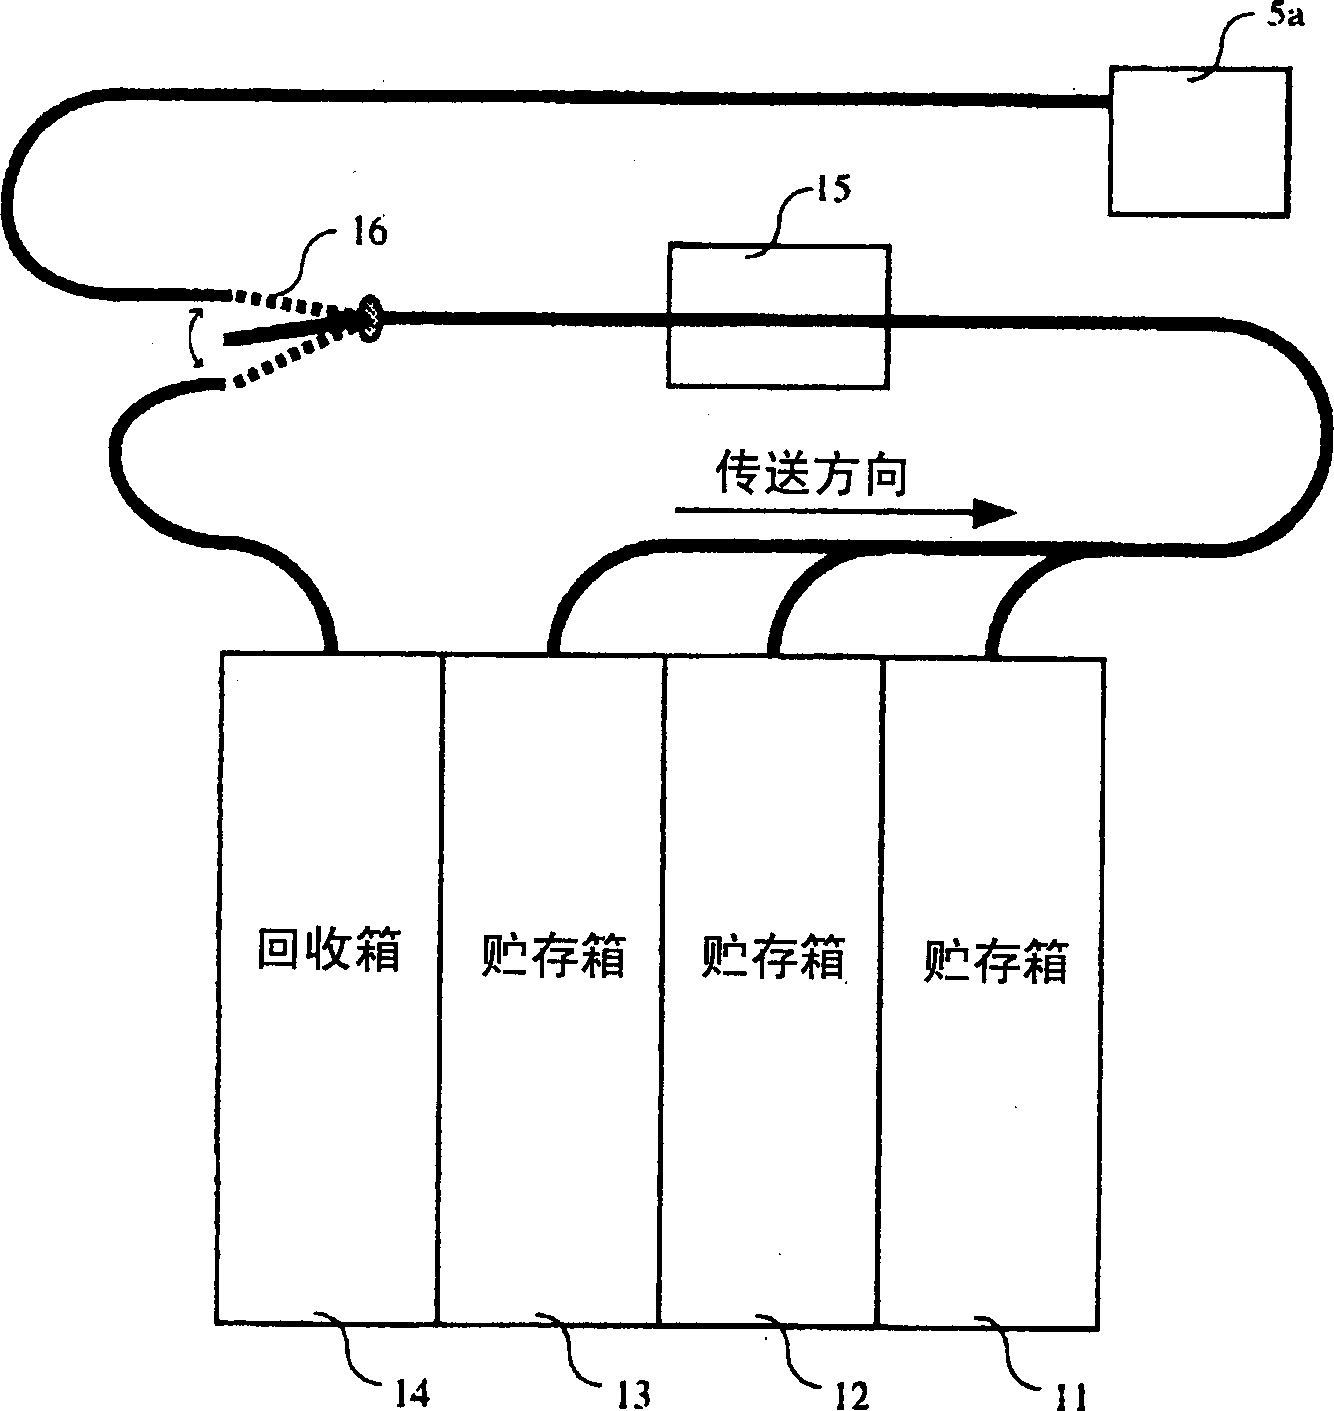 Paper-like counting device and trade processing device